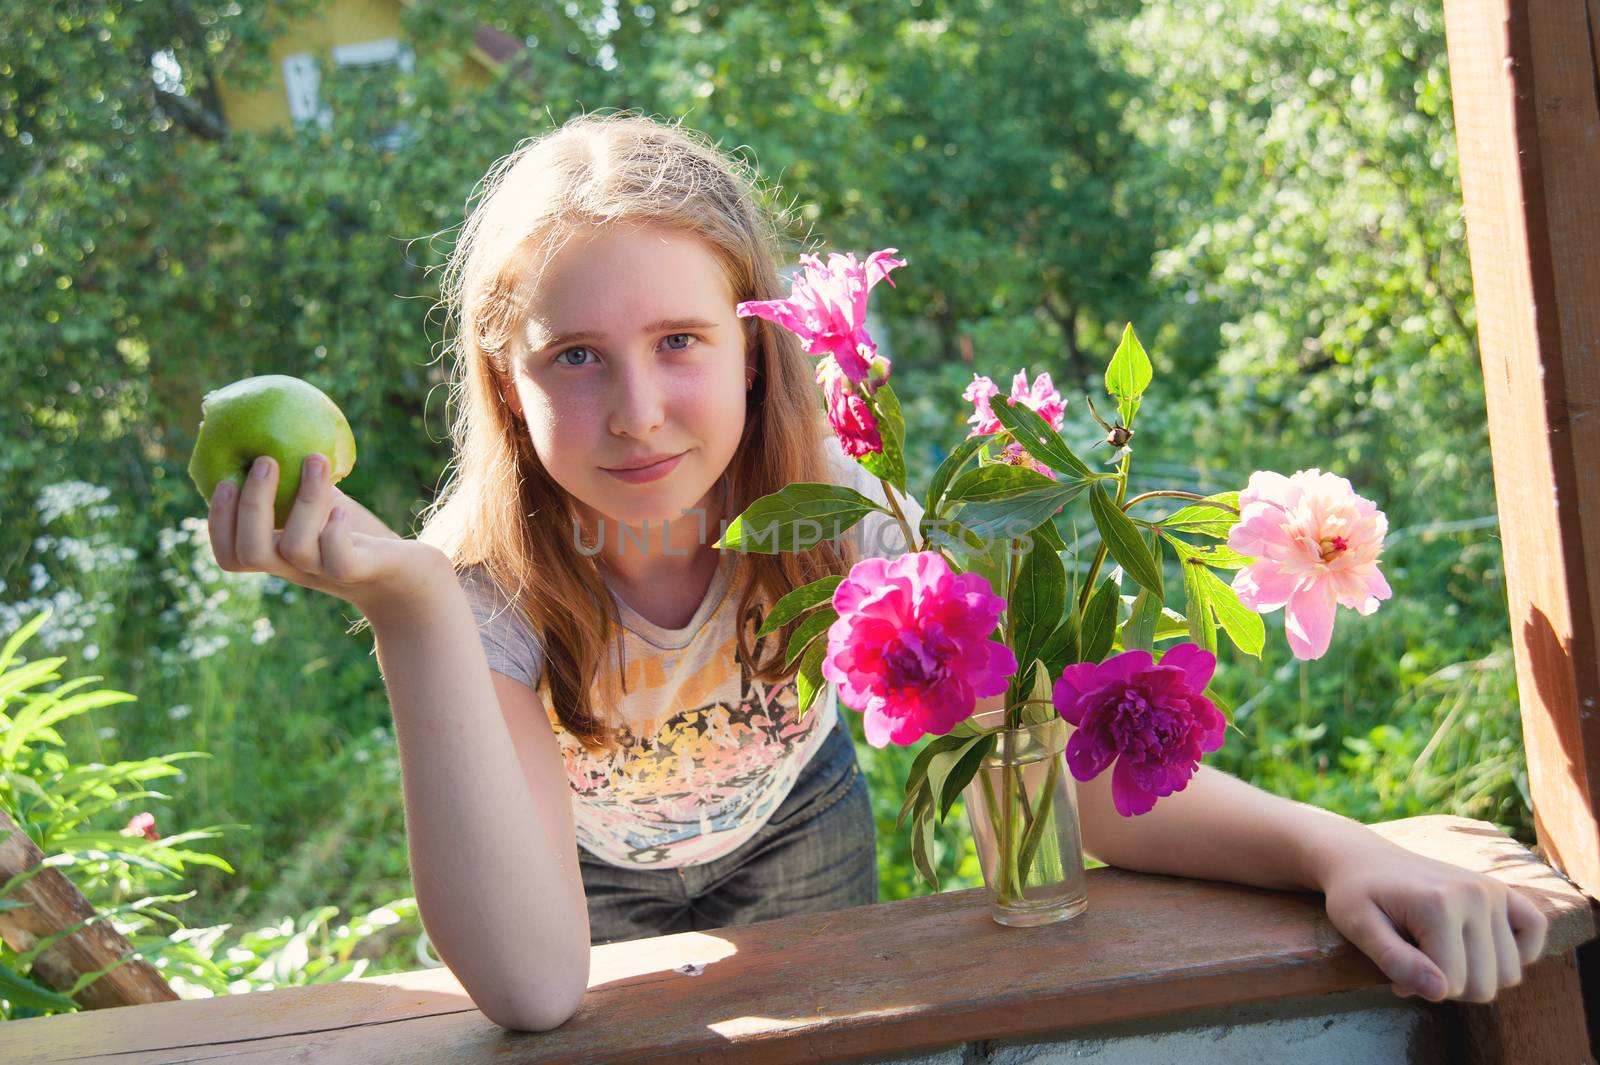 girl at the dacha with a bouquet of flowers by raduga21